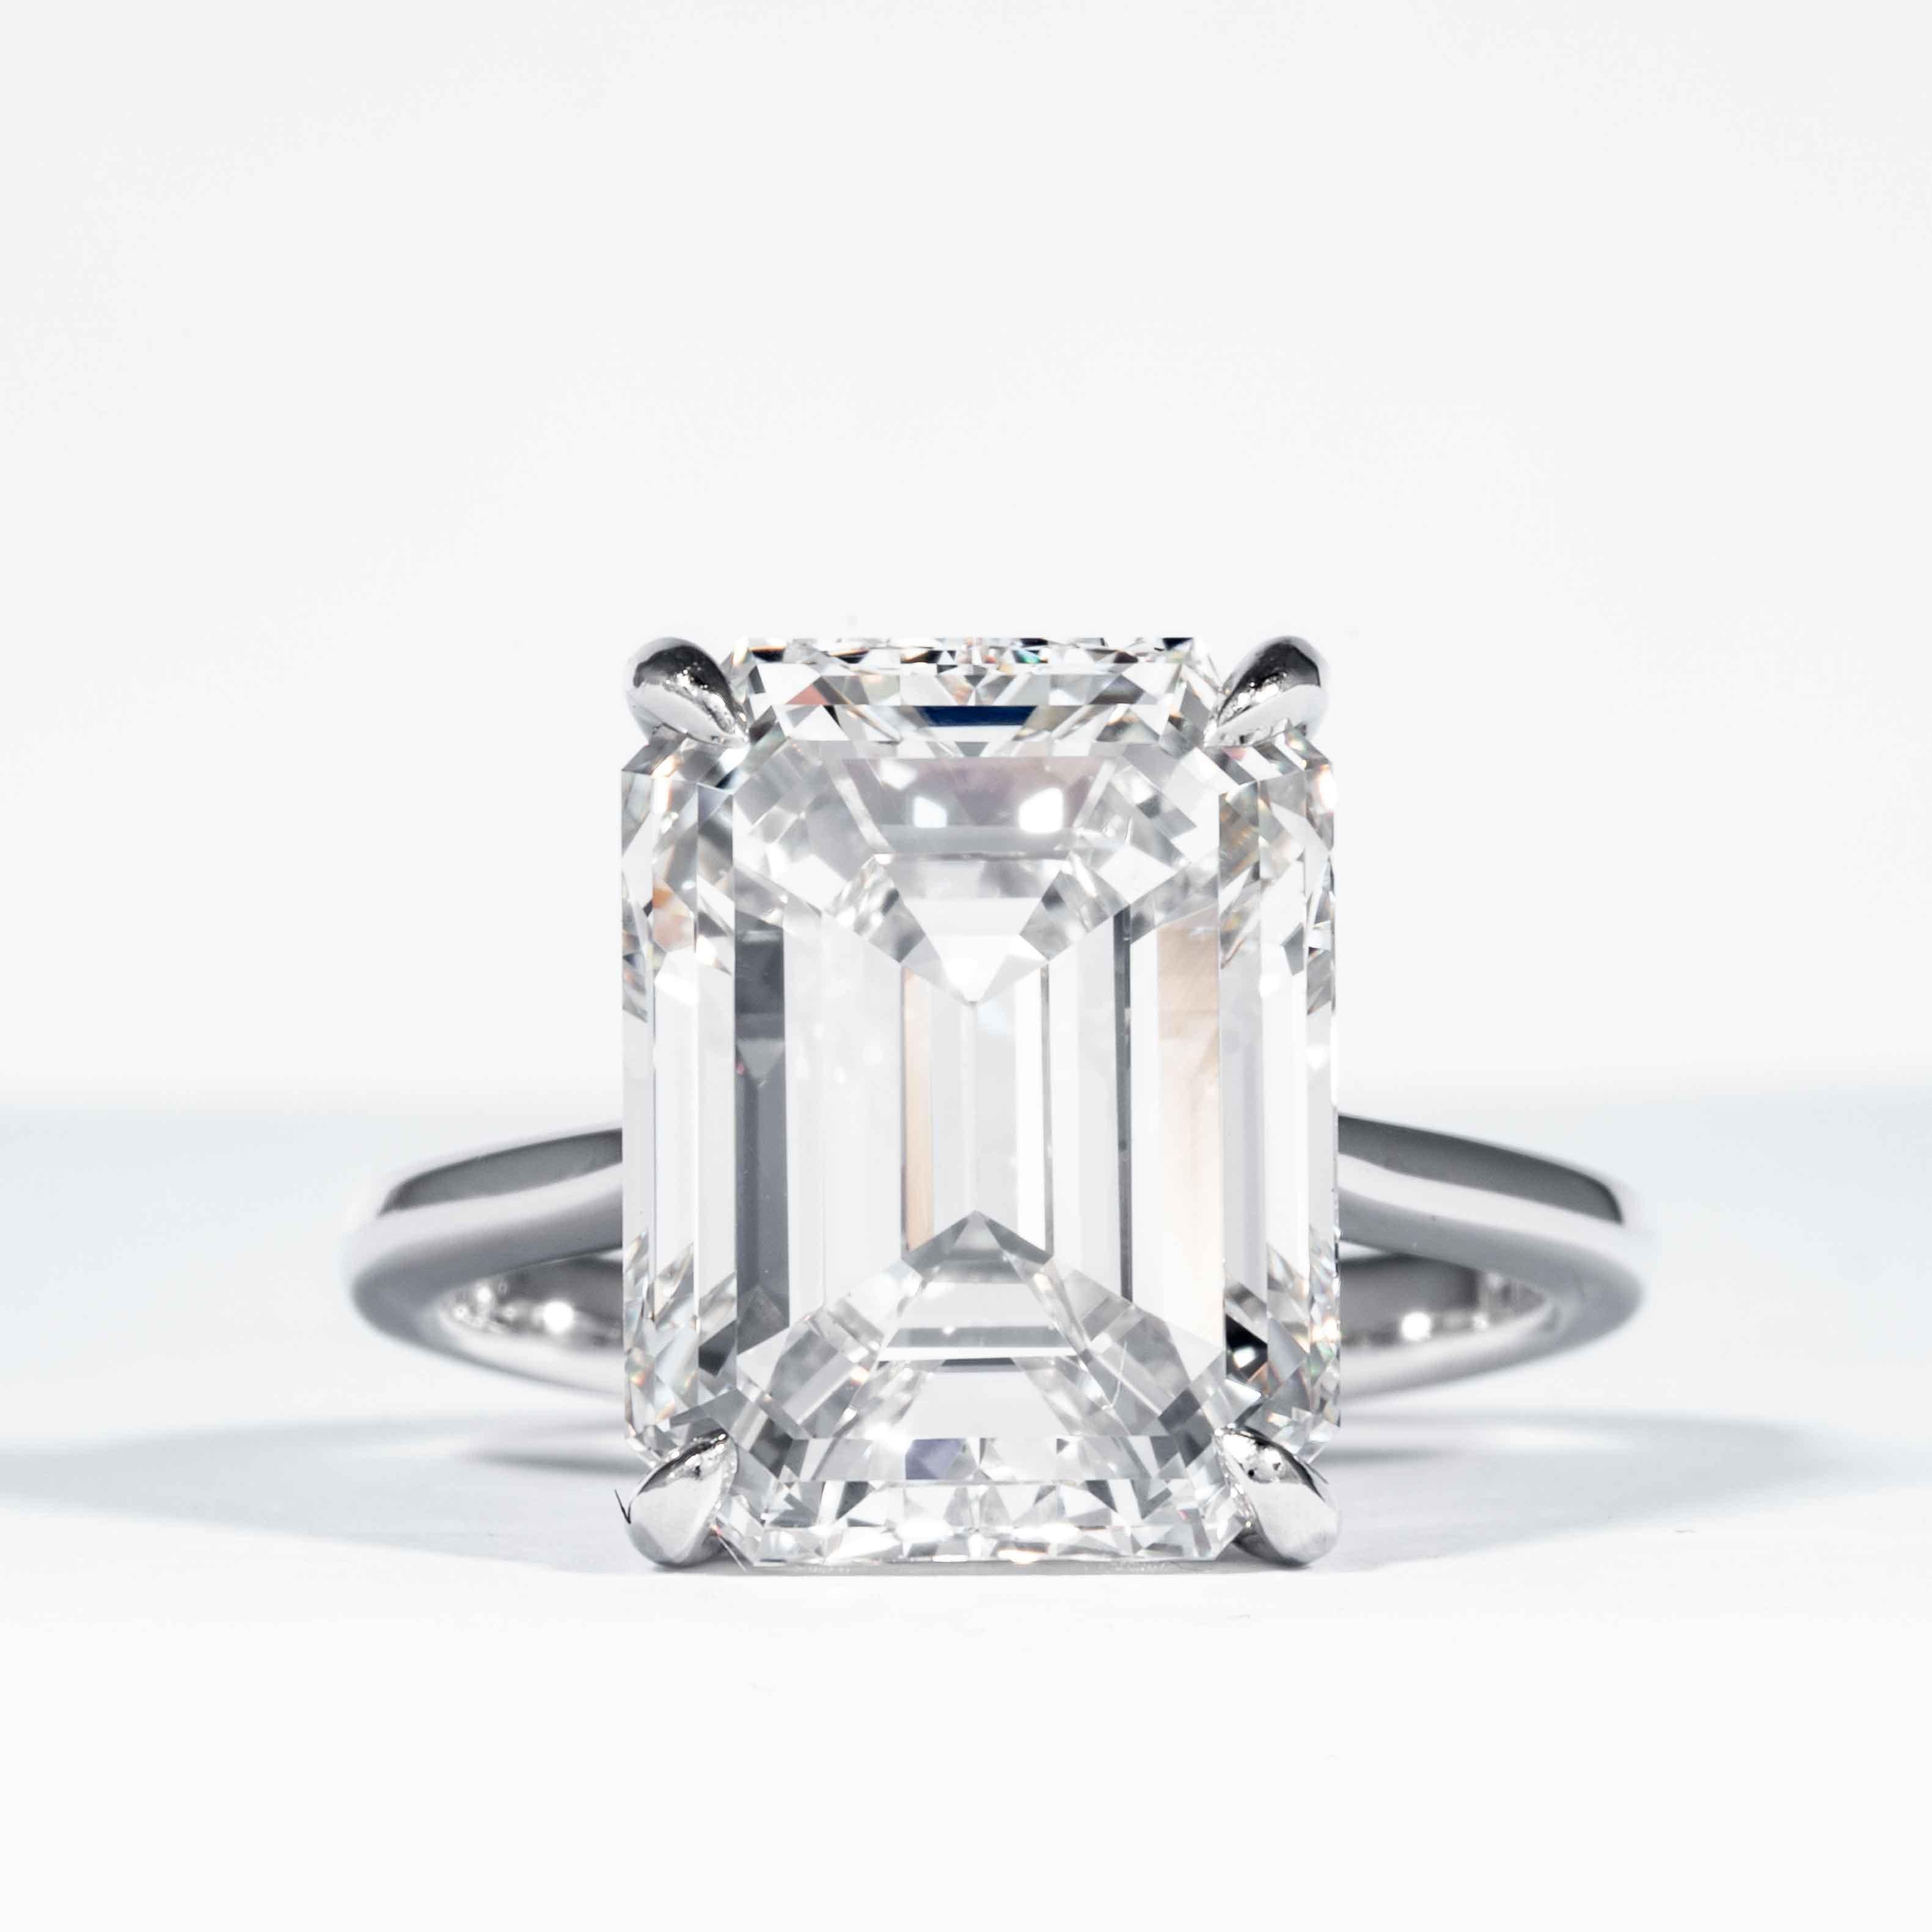 This diamond ring is offered by Shreve, Crump & Low. This 10.21 carat GIA Certified K VVS2 Emerald cut diamond measuring 14.07 mm x 10.70 mm x 7.38 mm is custom set in a handcrafted Shreve, Crump & Low platinum solitaire ring. The 10.21 emerald cut